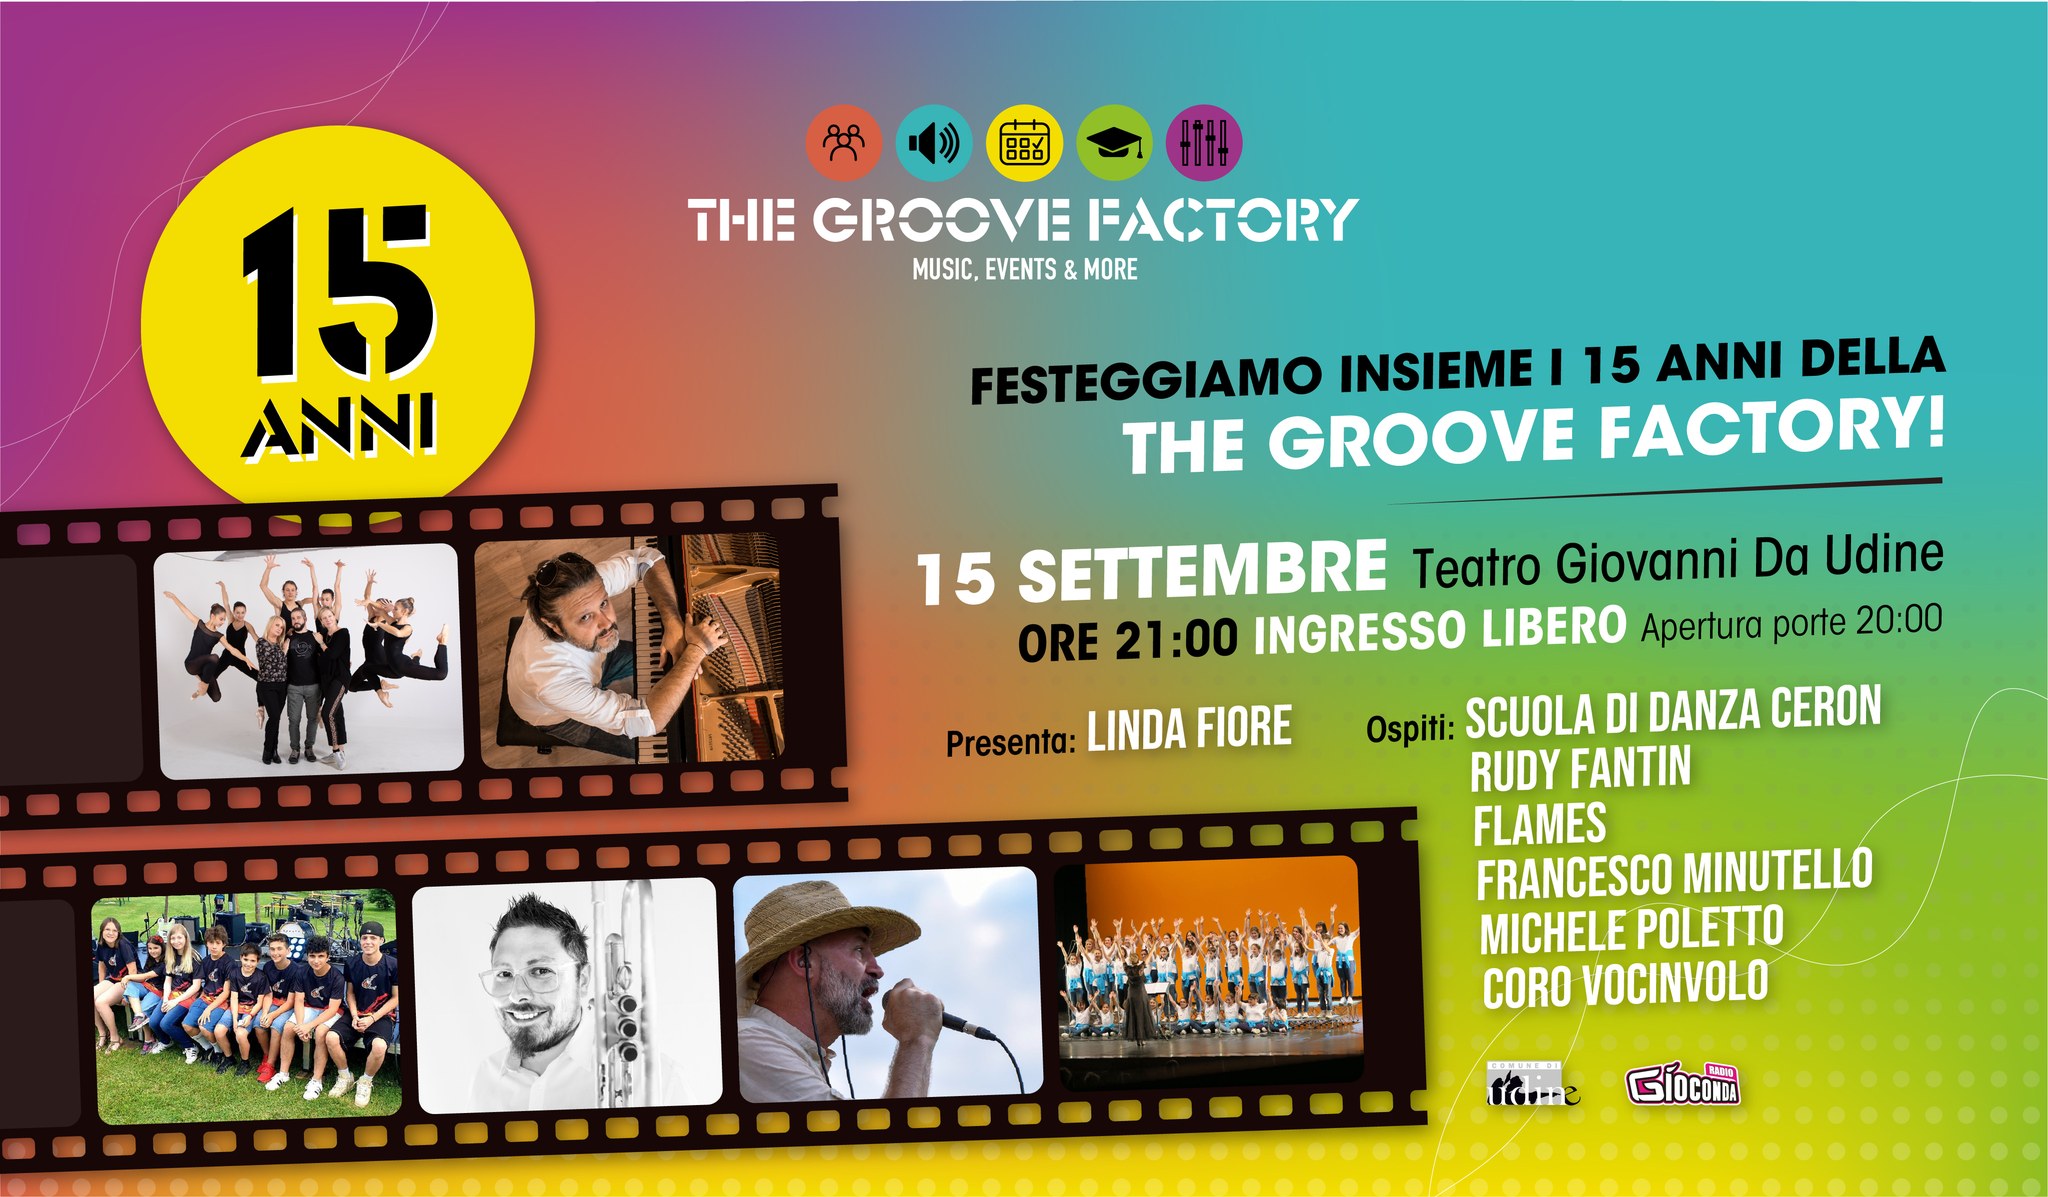 15 ANNI THE GROOVE FACTORY